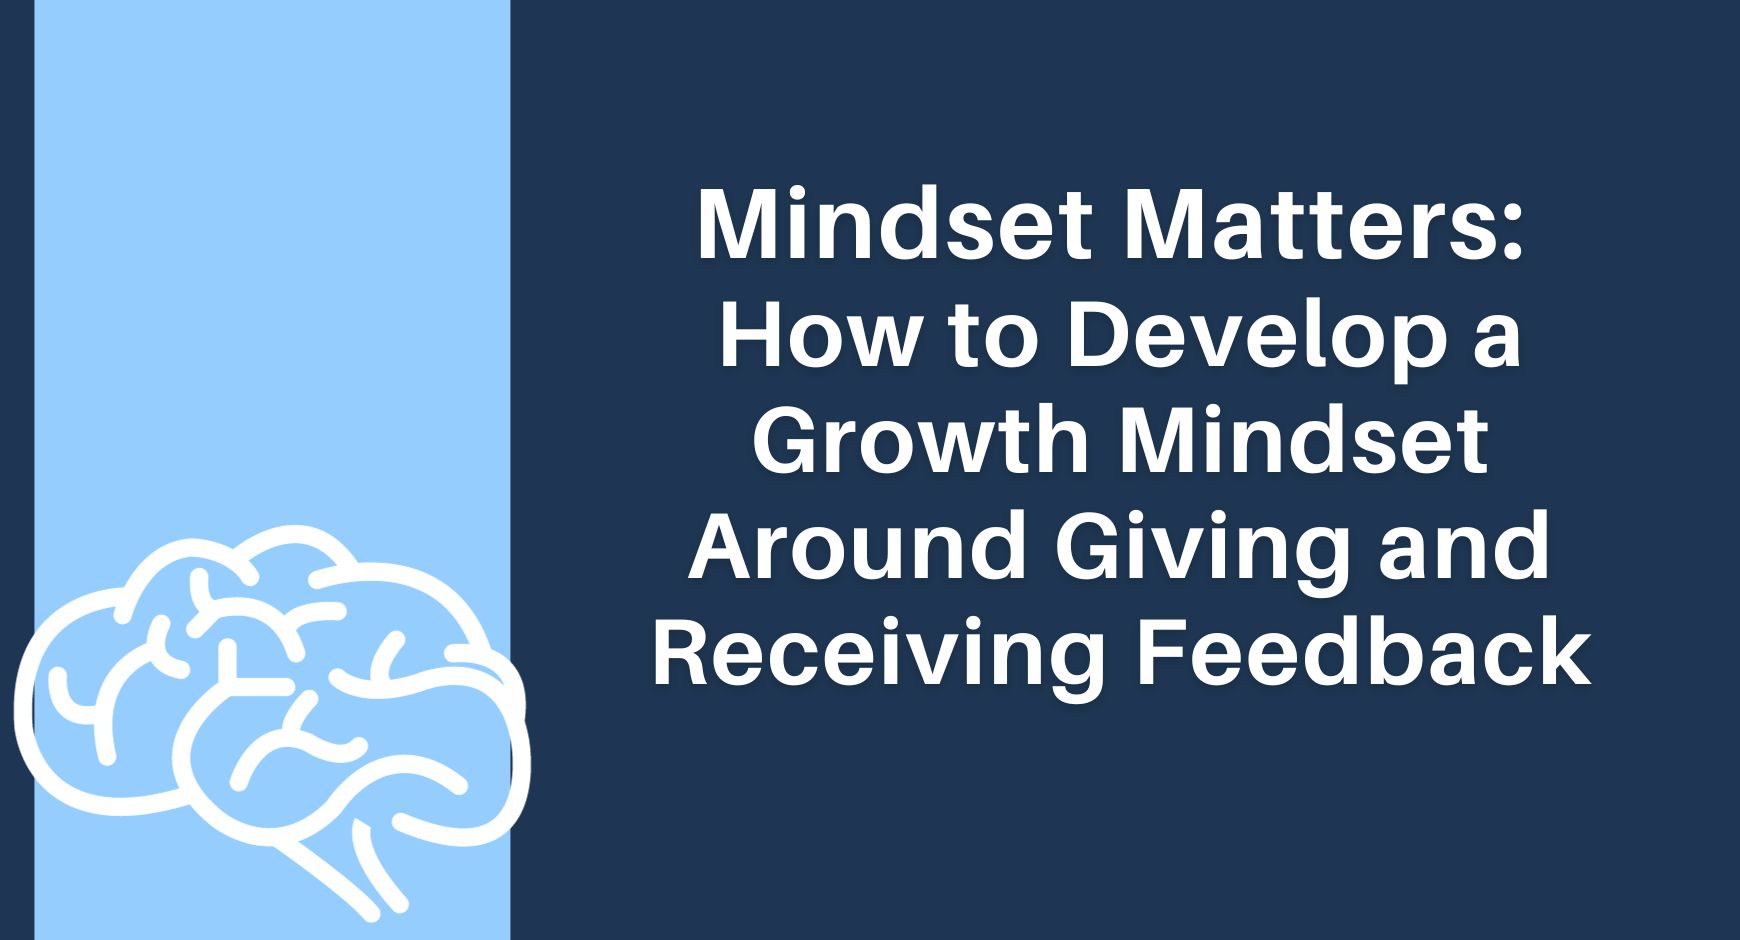 A white outline of a brain against a blue background with words that read "Mindset Matters: How to Develop a Growth Mindset Around Giving and Receiving Feedback"